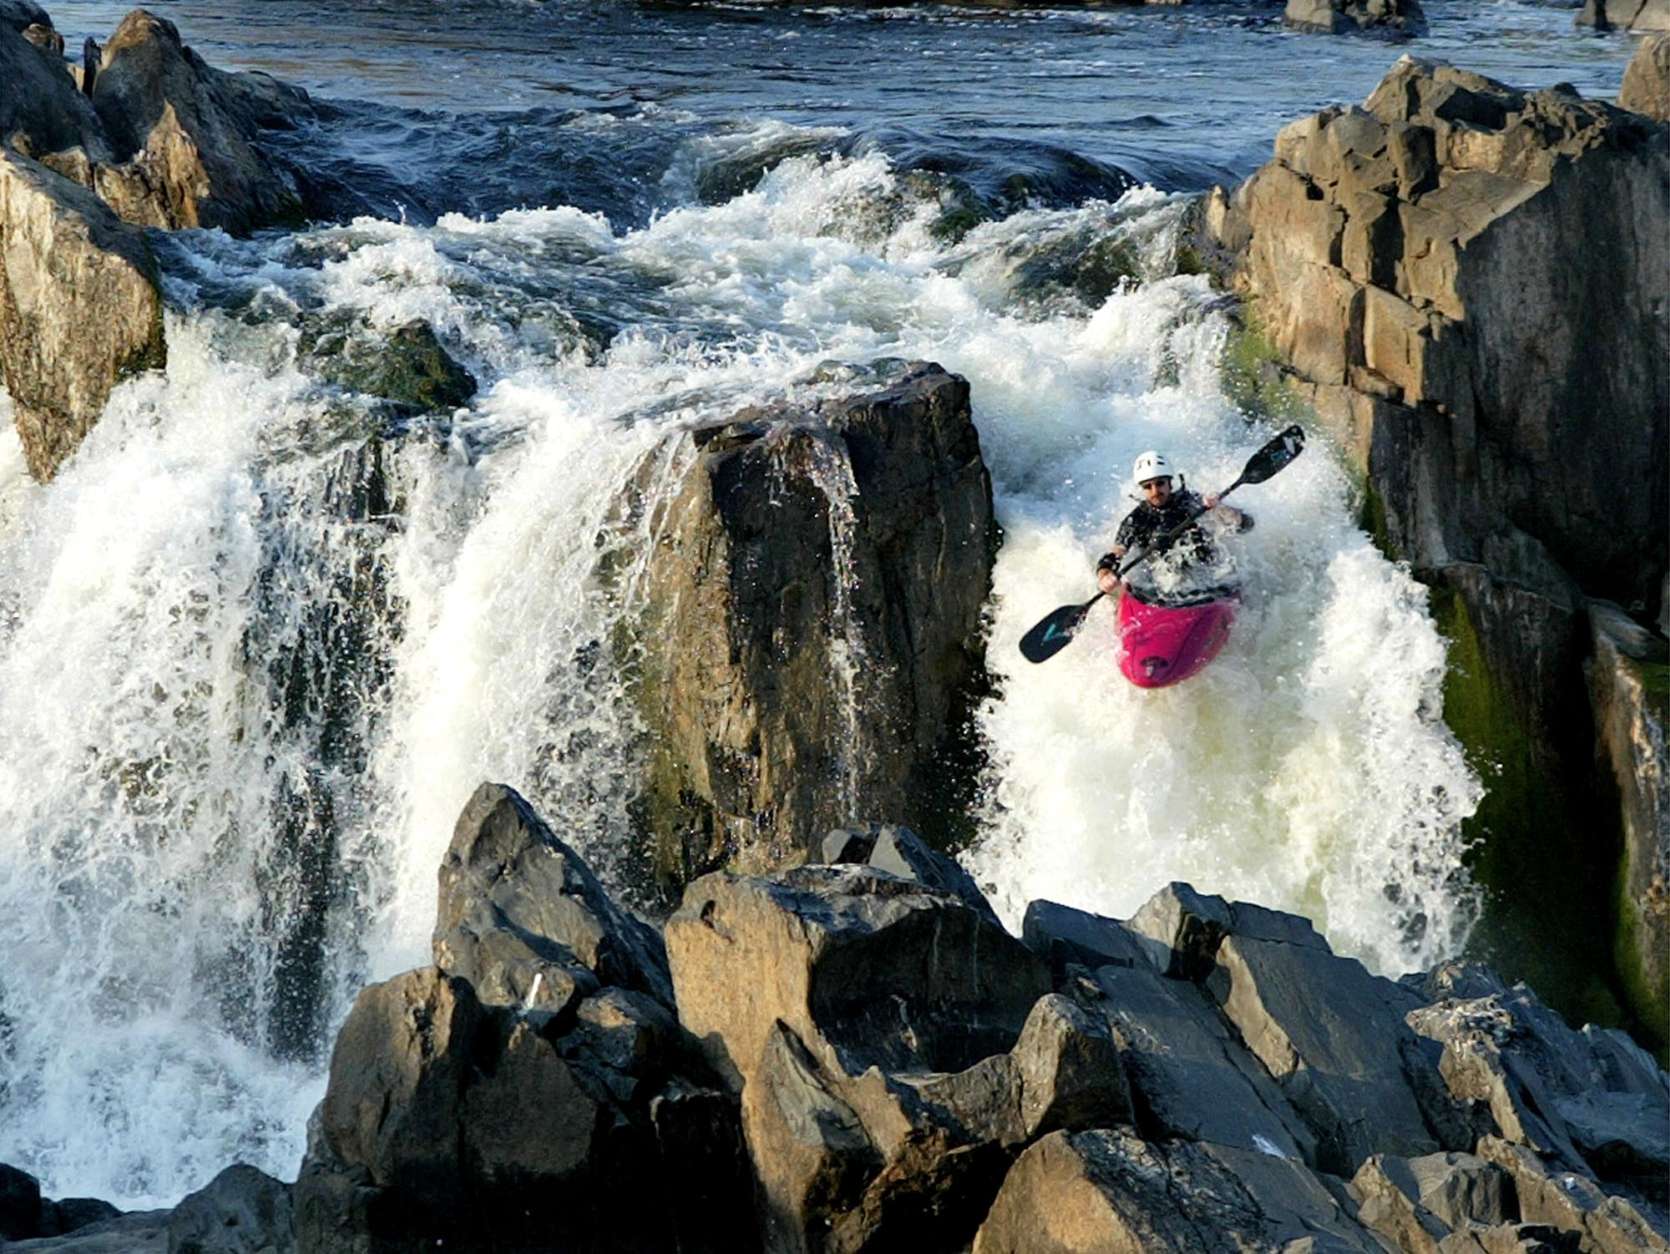 A local kayaker cools off  making his way through a roaring set of rapids Monday, Aug. 19, 2002, at Great Falls in northern Virginia. (AP Photo/Ron Edmonds)